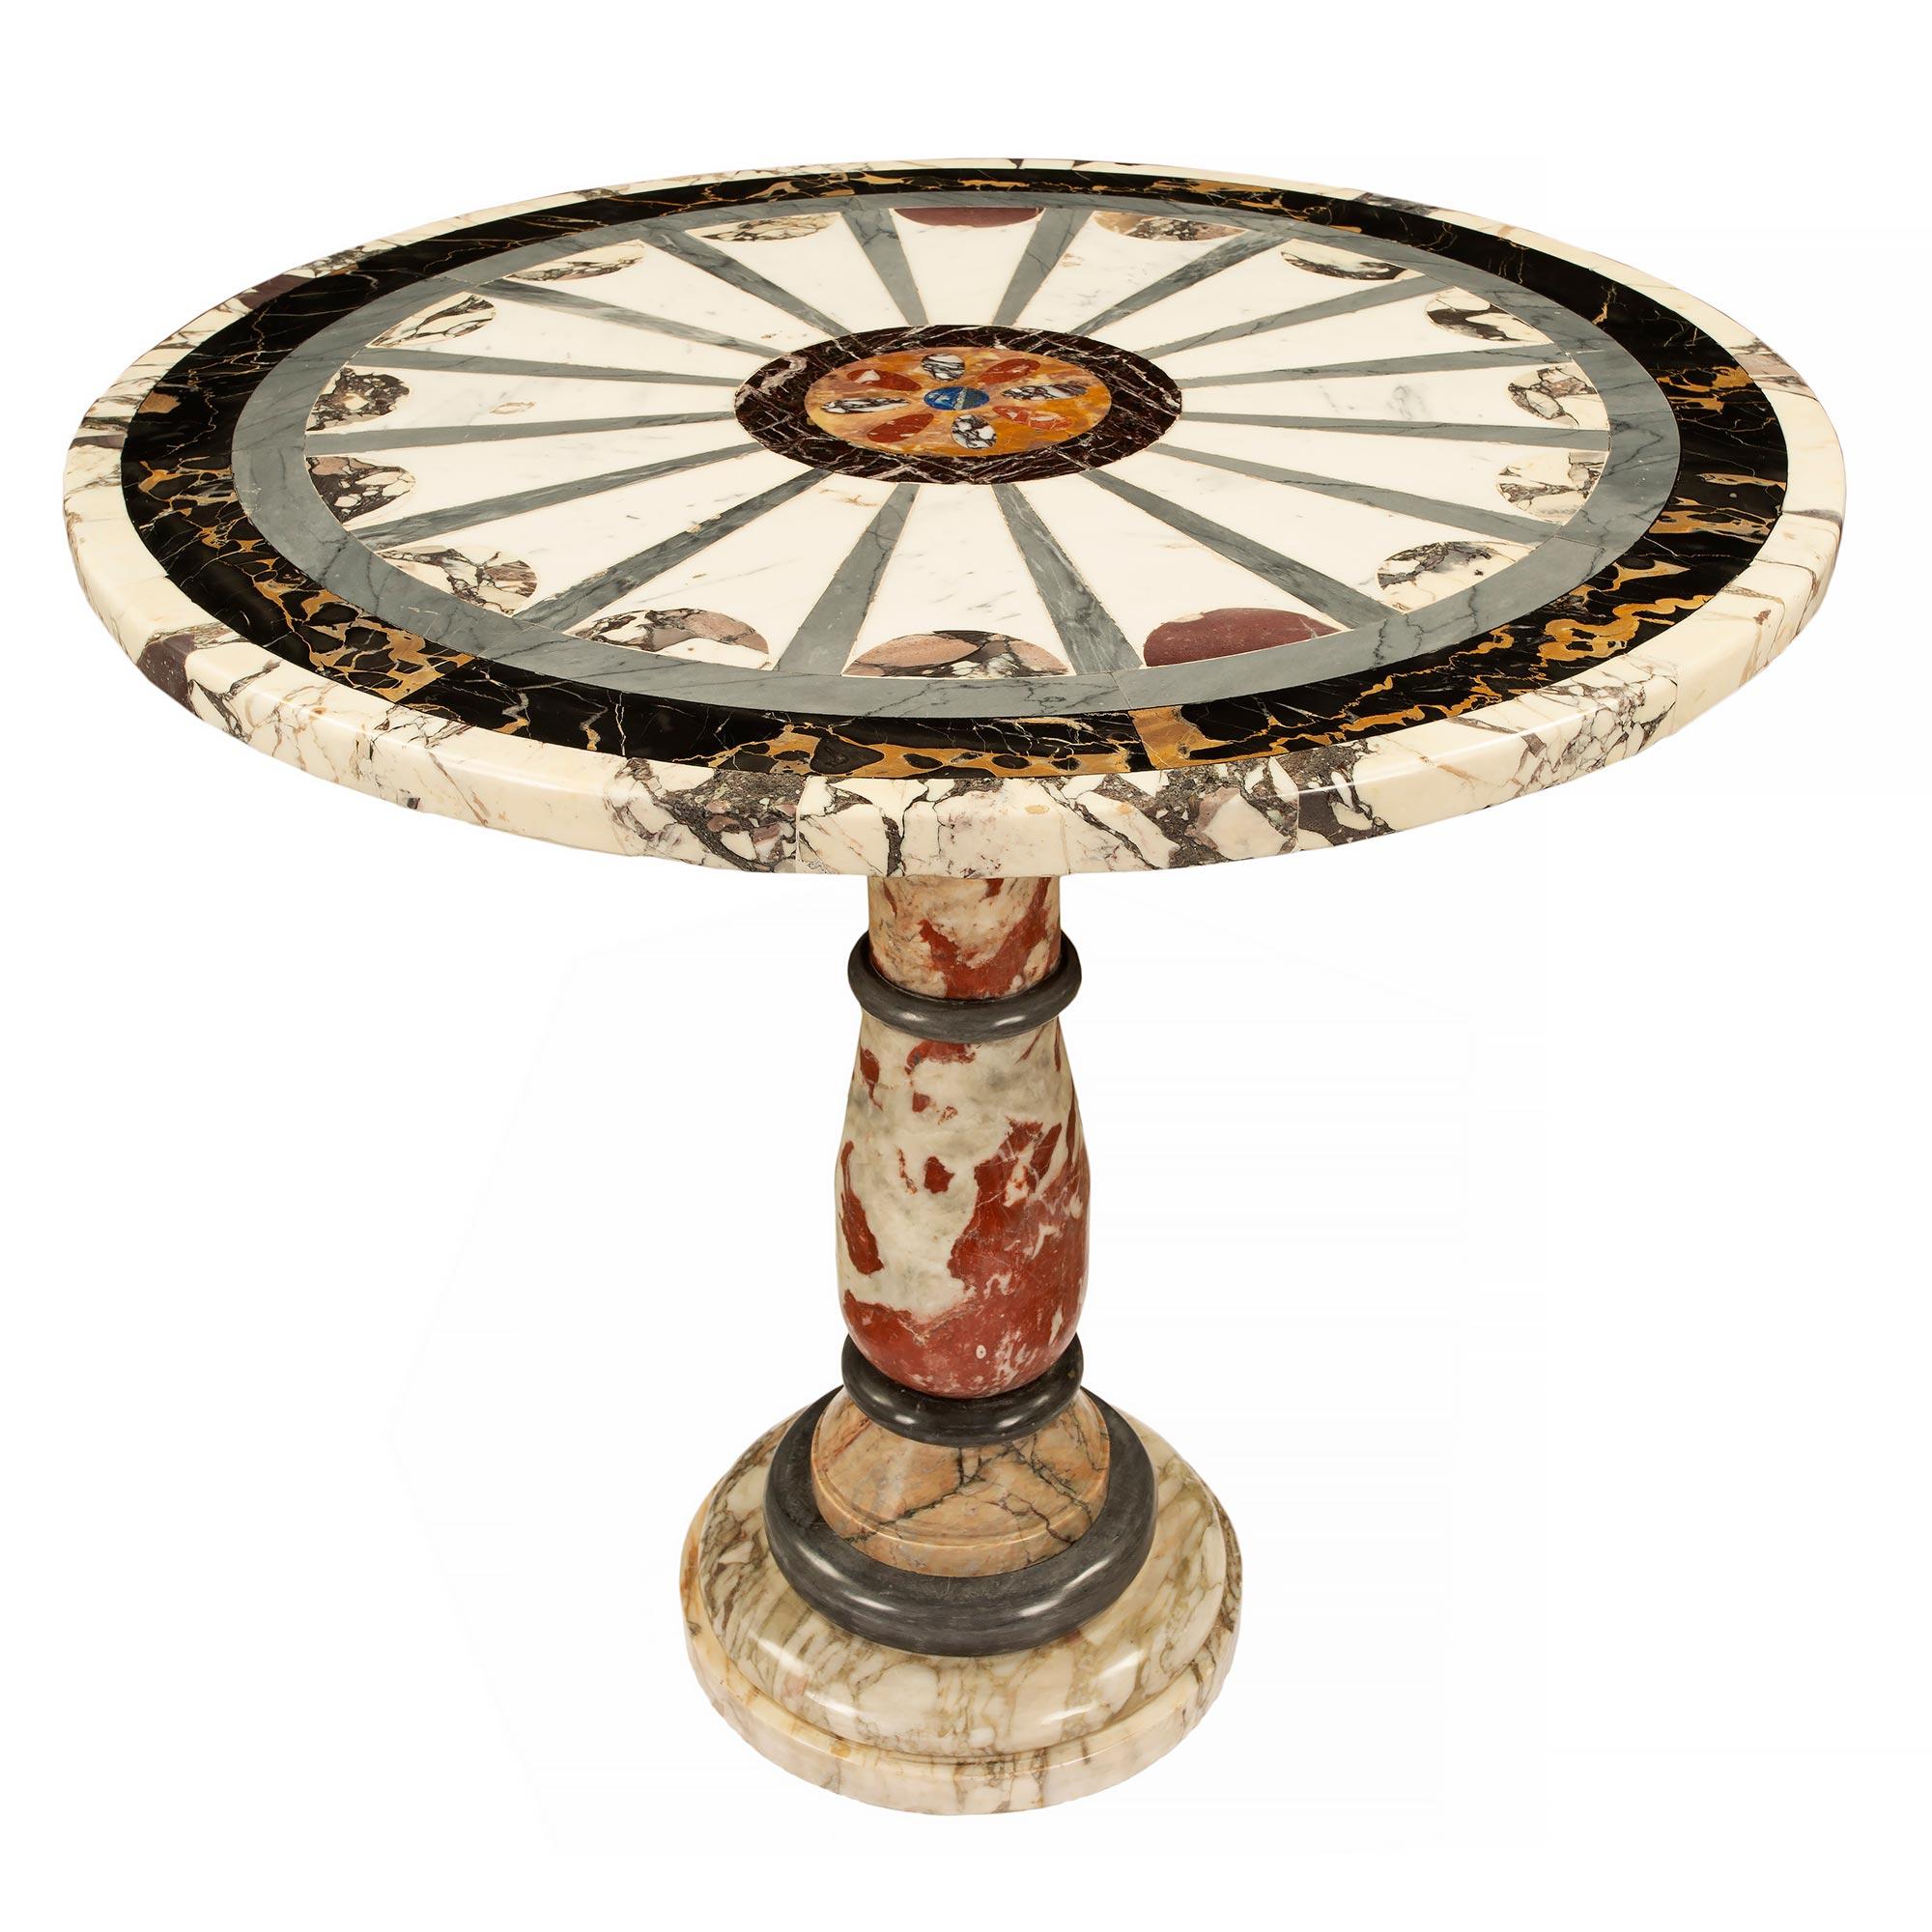 A magnificent Italian 19th century Neo-Classical st. marble side/center table. The table is raised by a circular mottled Breche Violette base below an elegant Bleu Turquin marble band and the circular Incarna Turquin central support. The stunning